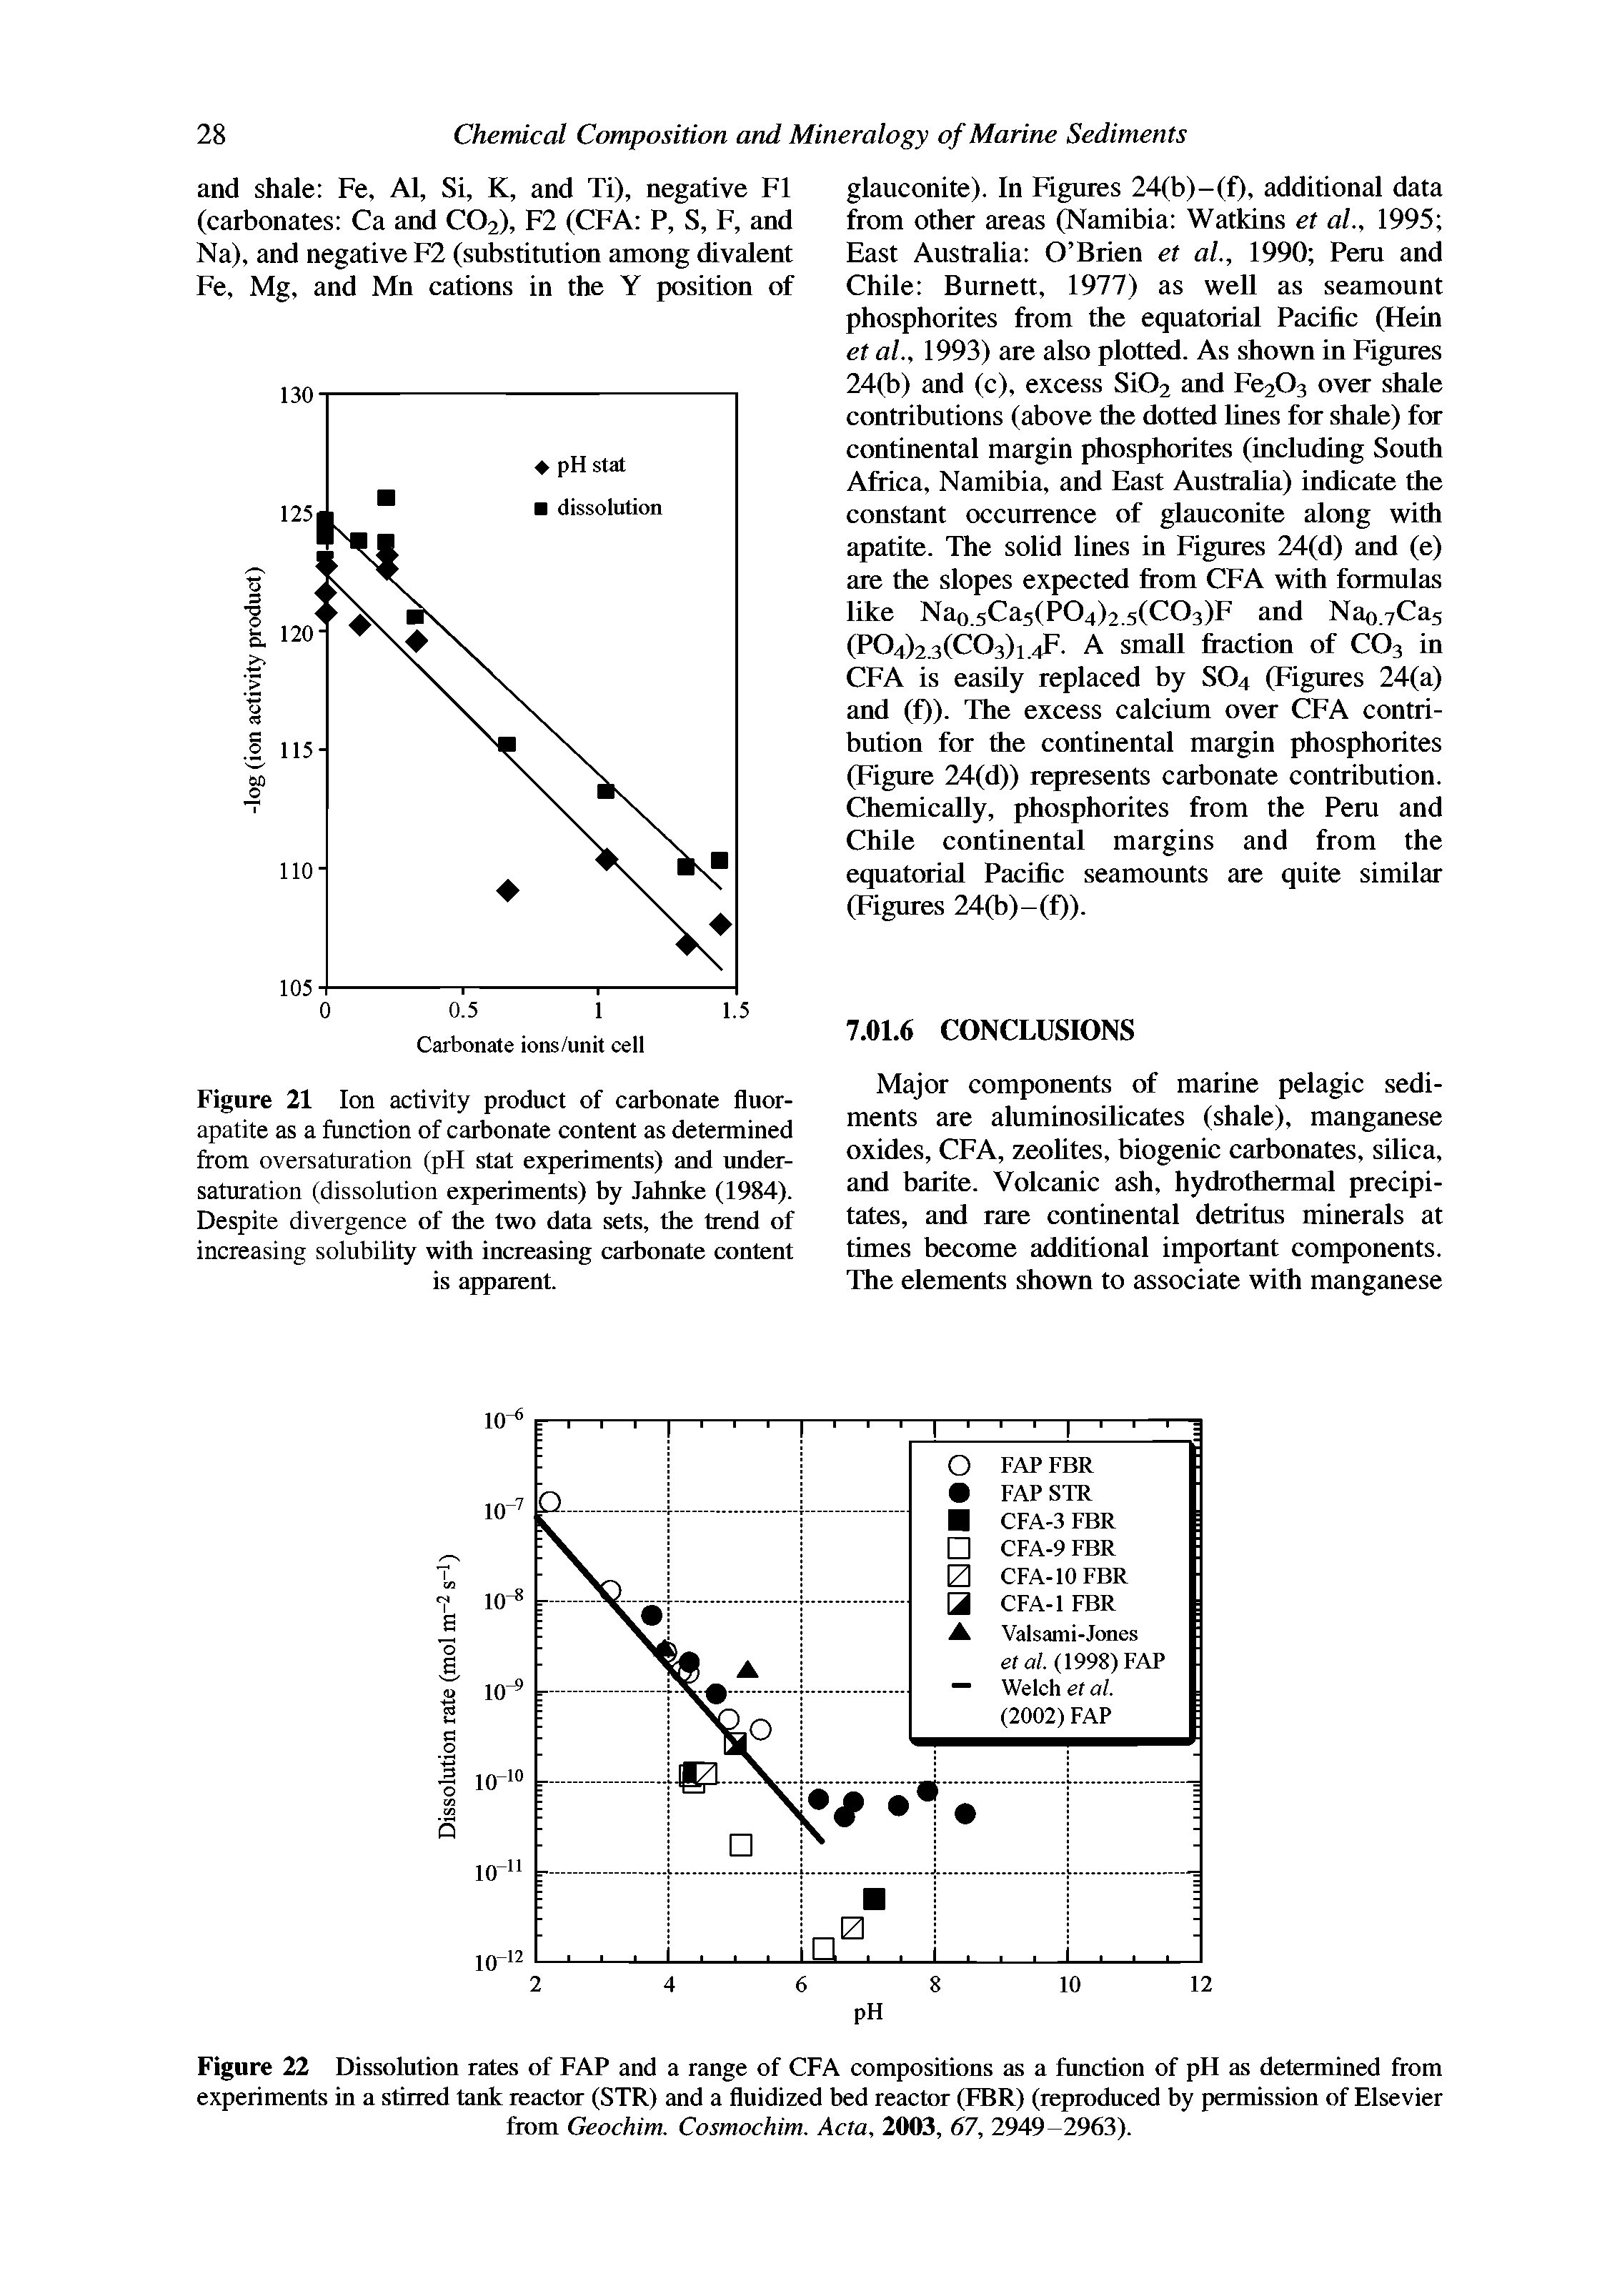 Figure 21 Ion activity product of carbonate fluor-apatite as a function of carbonate content as determined from oversaturation (pH stat experiments) and undersaturation (dissolution experiments) by Jahnke (1984). Despite divergence of the two data sets, the trend of increasing solubiUty with increasing carbonate content is apparent.